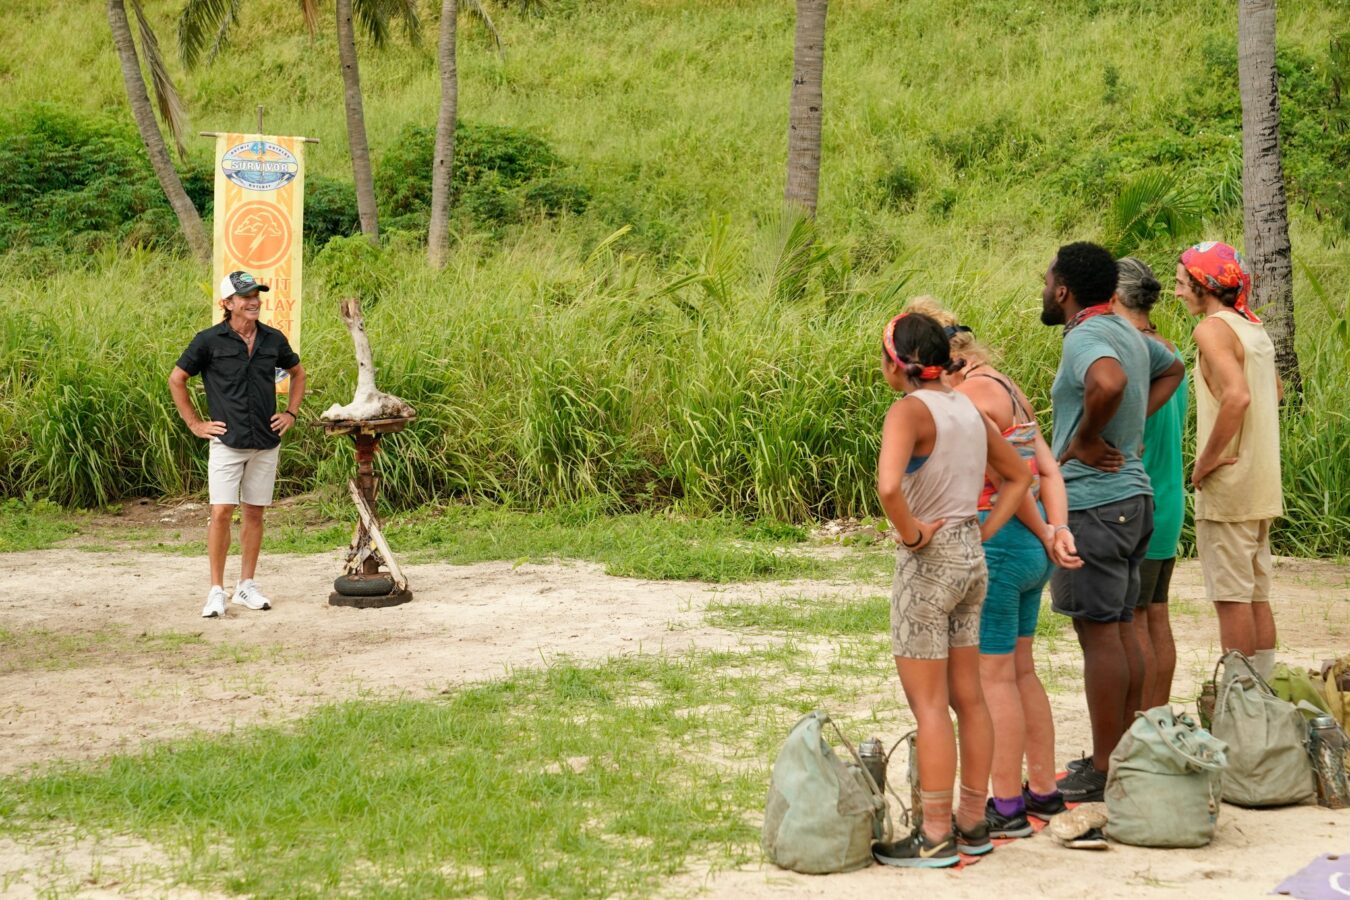 The Finale 5 at the immunity challenge on Survivor 41